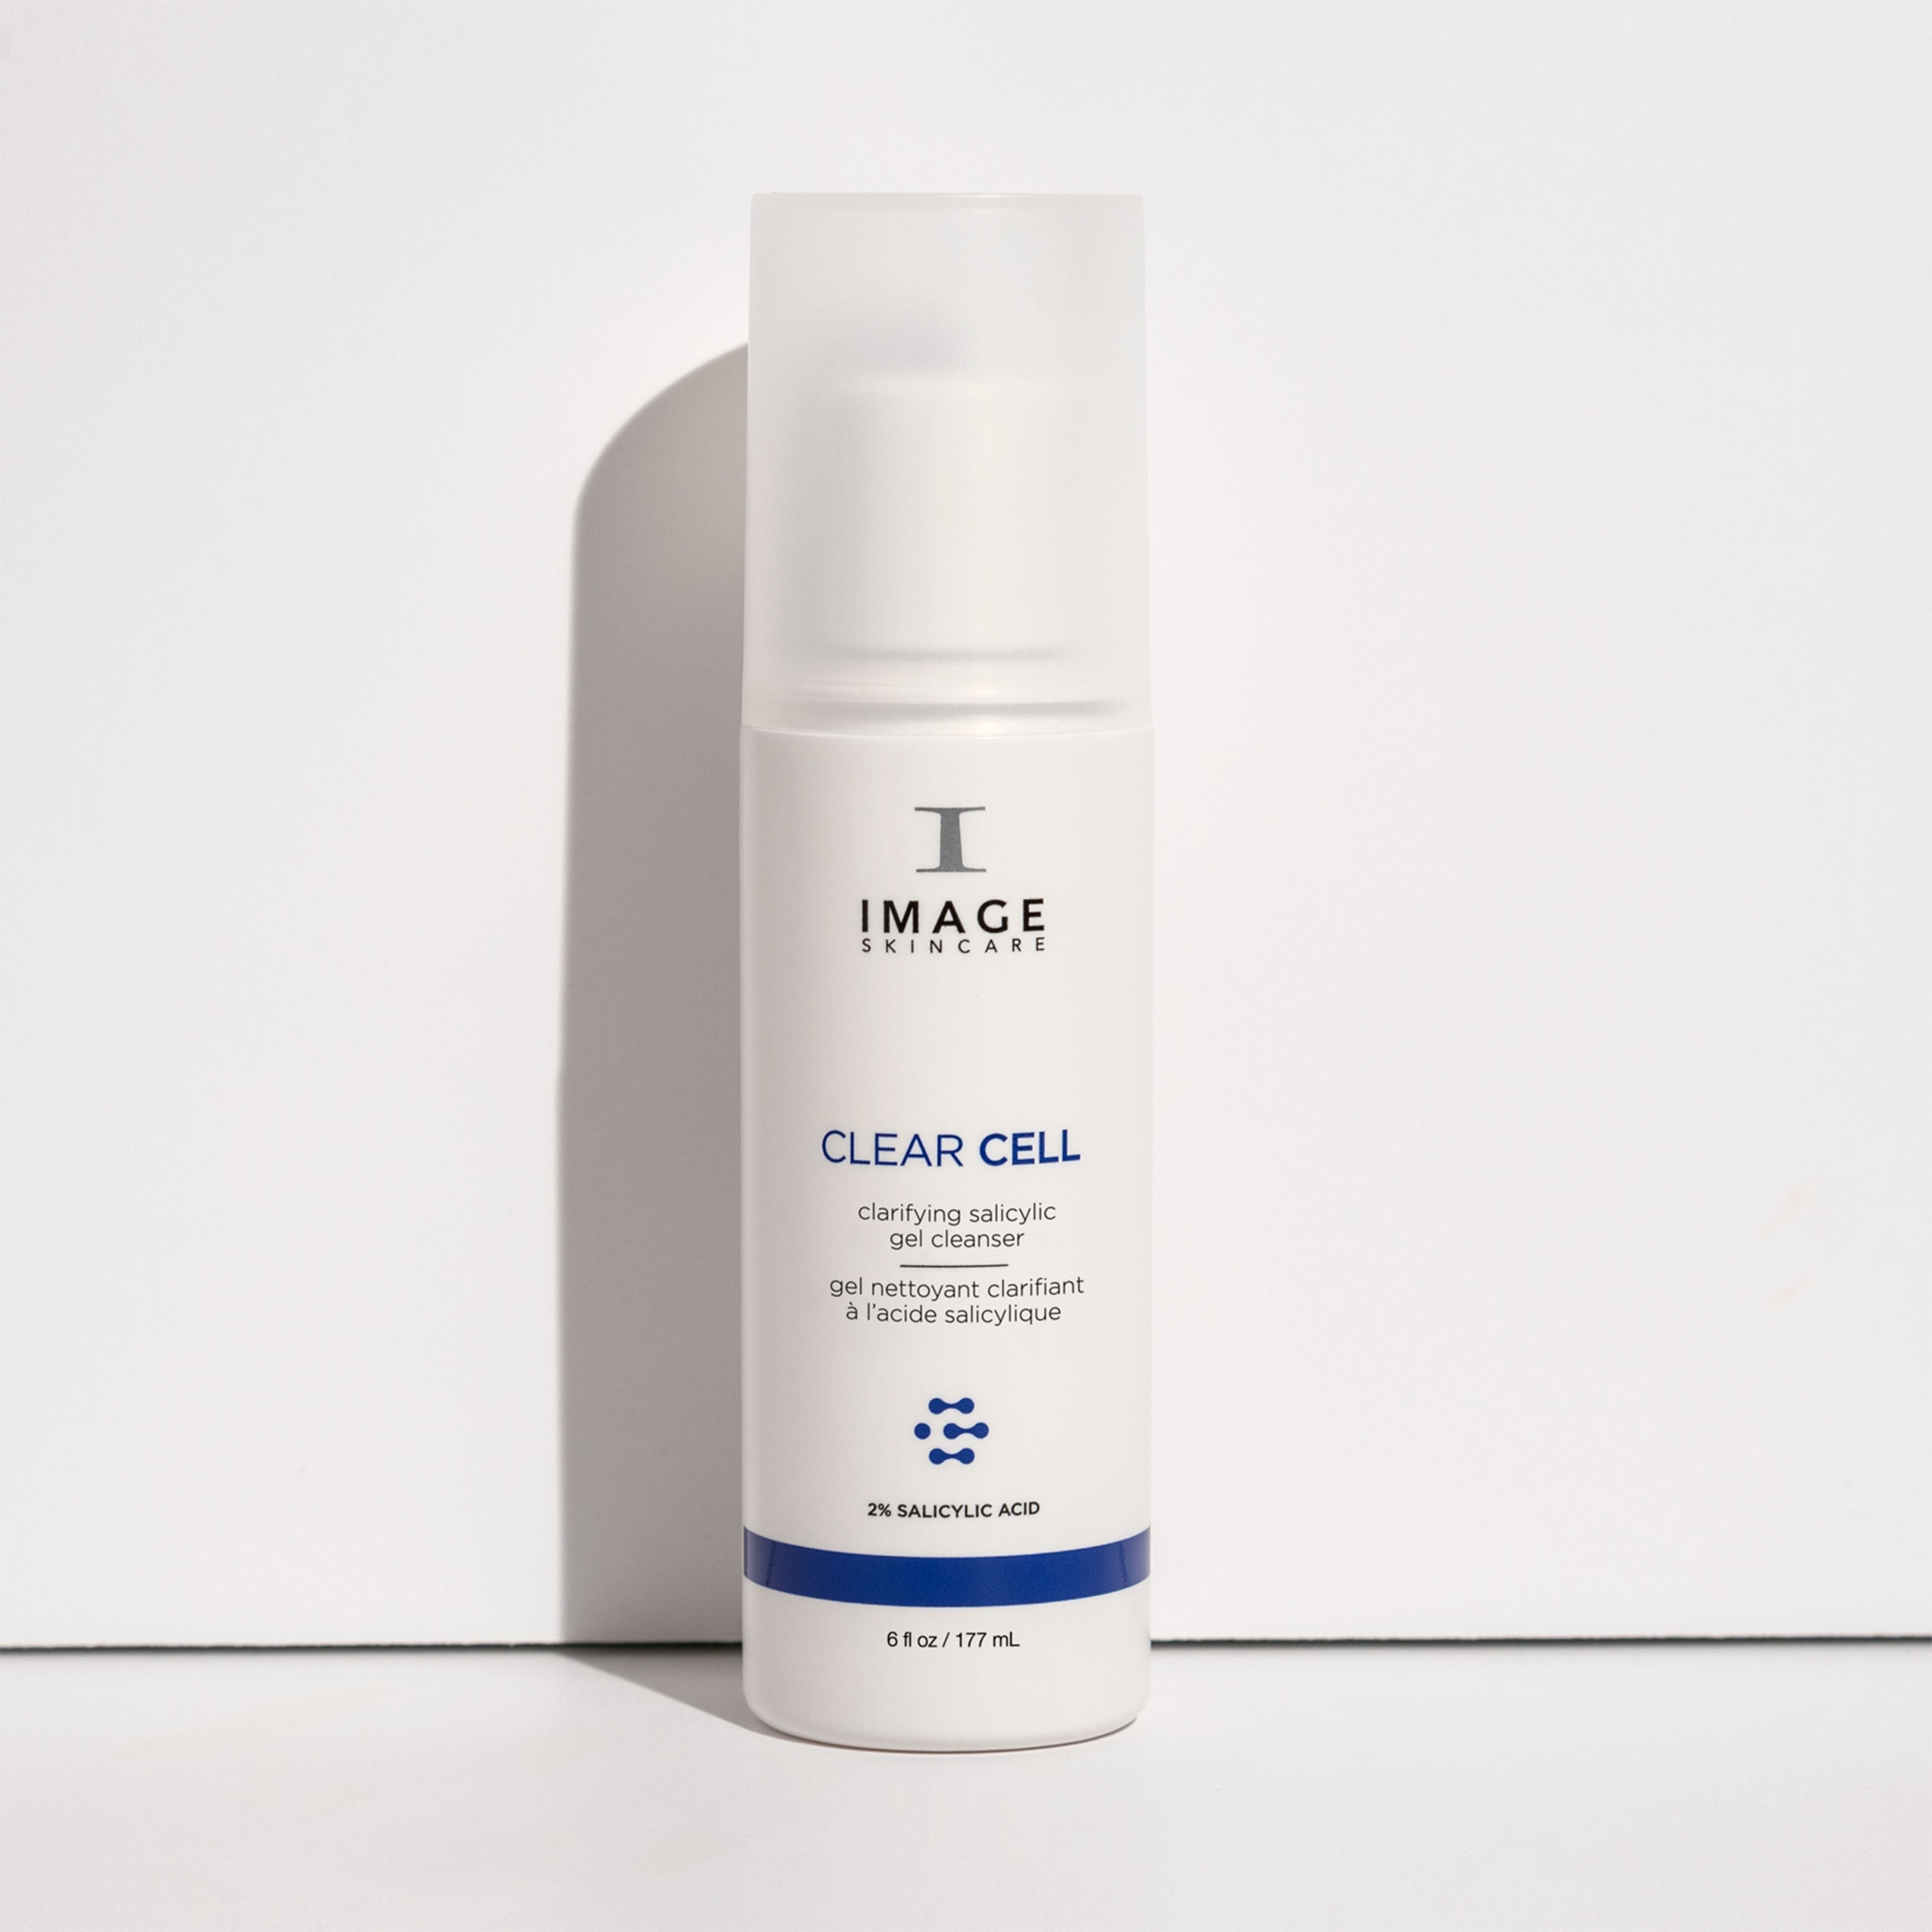 Image Skincare - Clear Cell - Salicylic Gel Cleanser